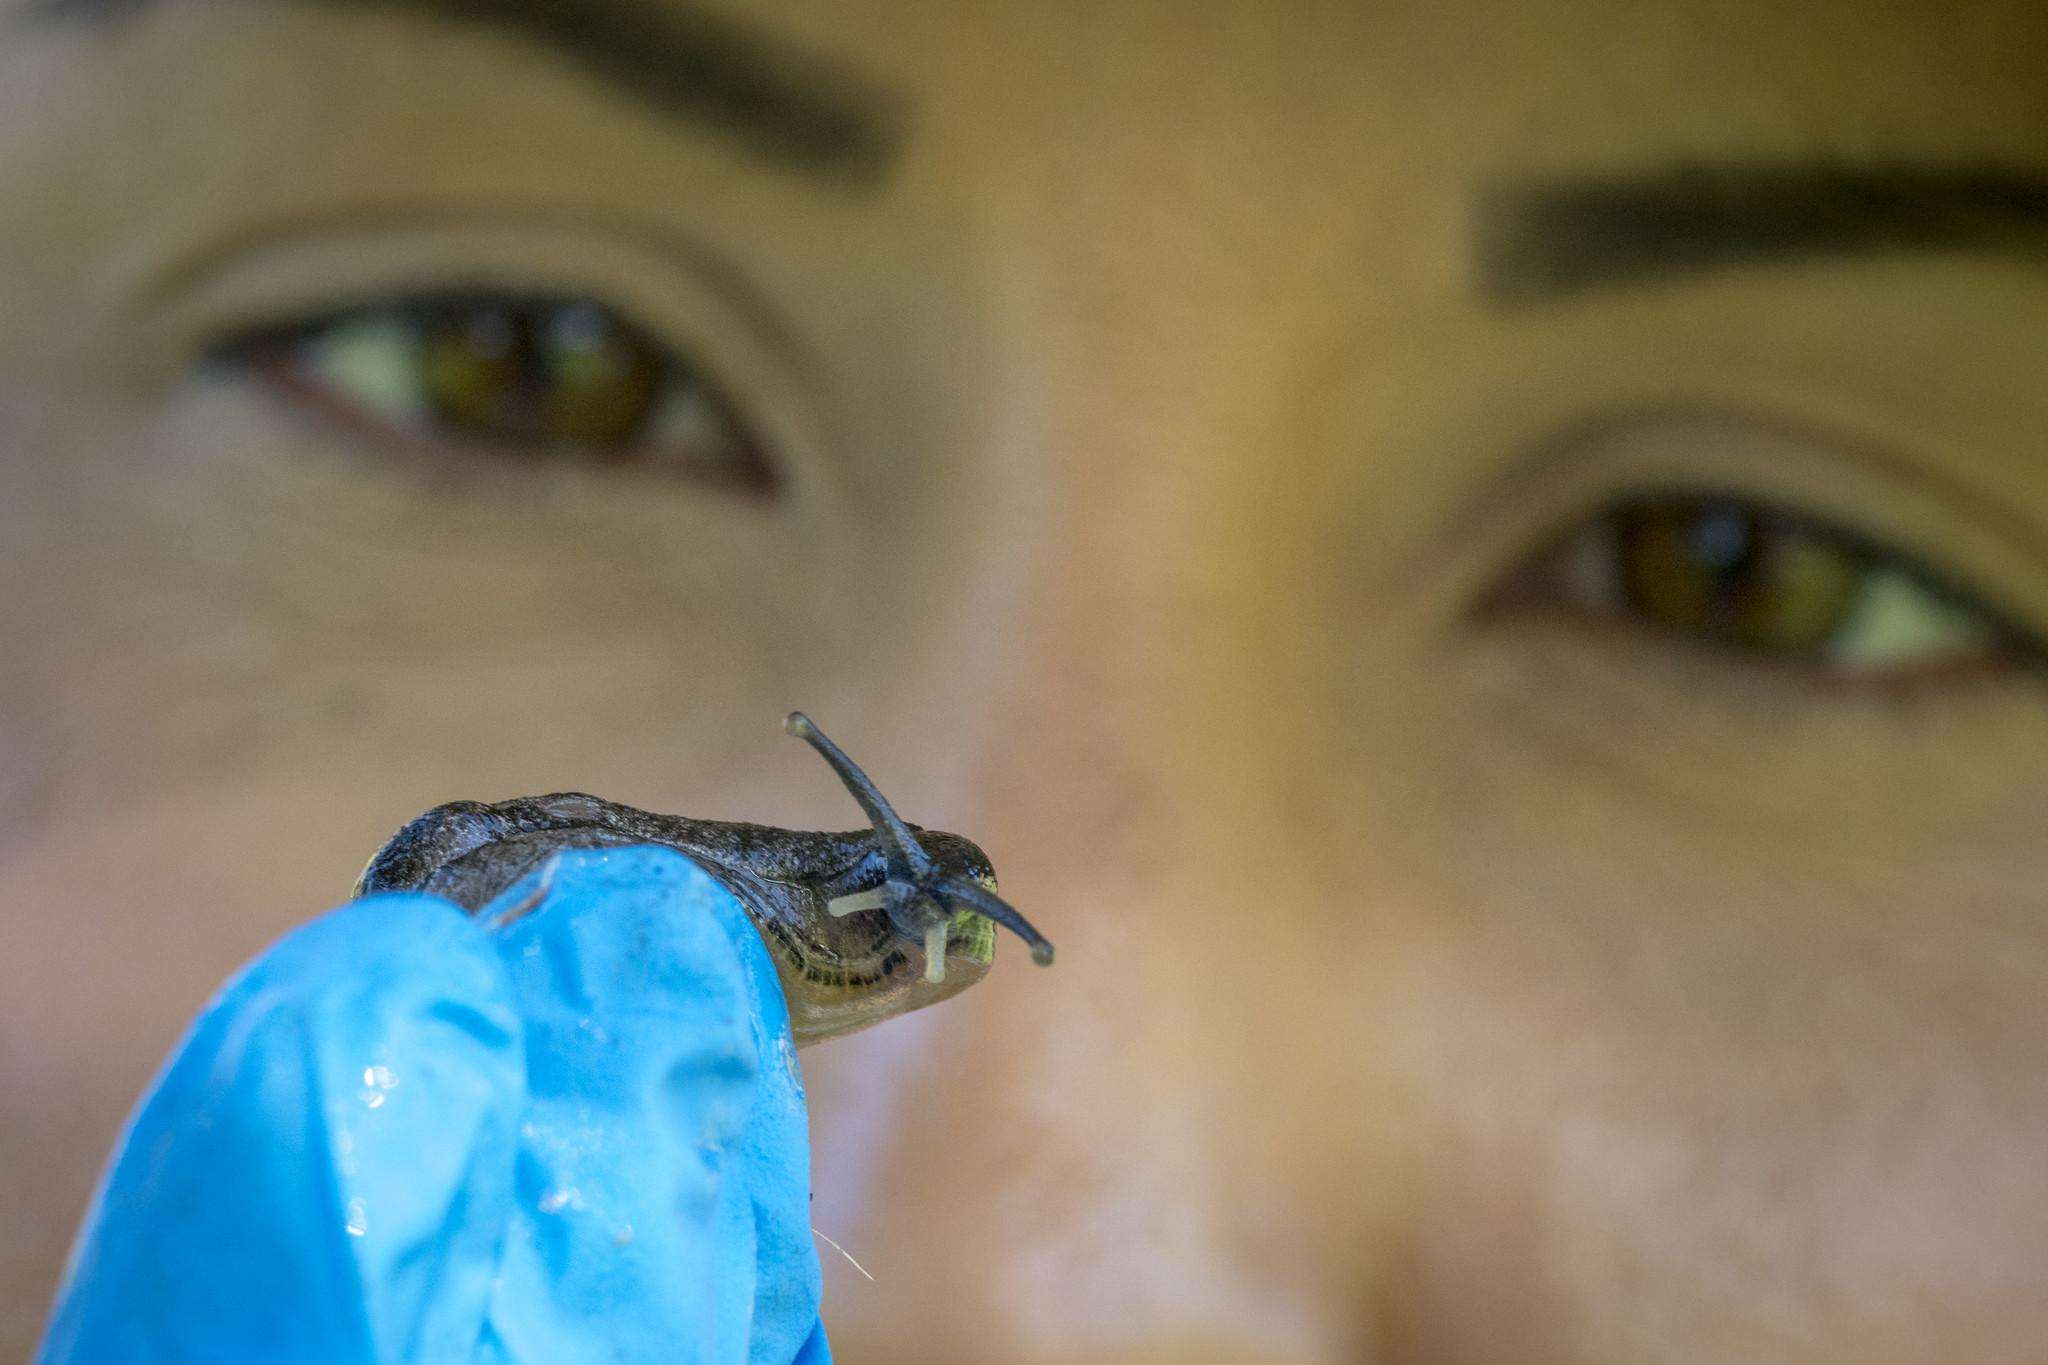 Close-up of woman wearing blue protective gloves holding a slug.